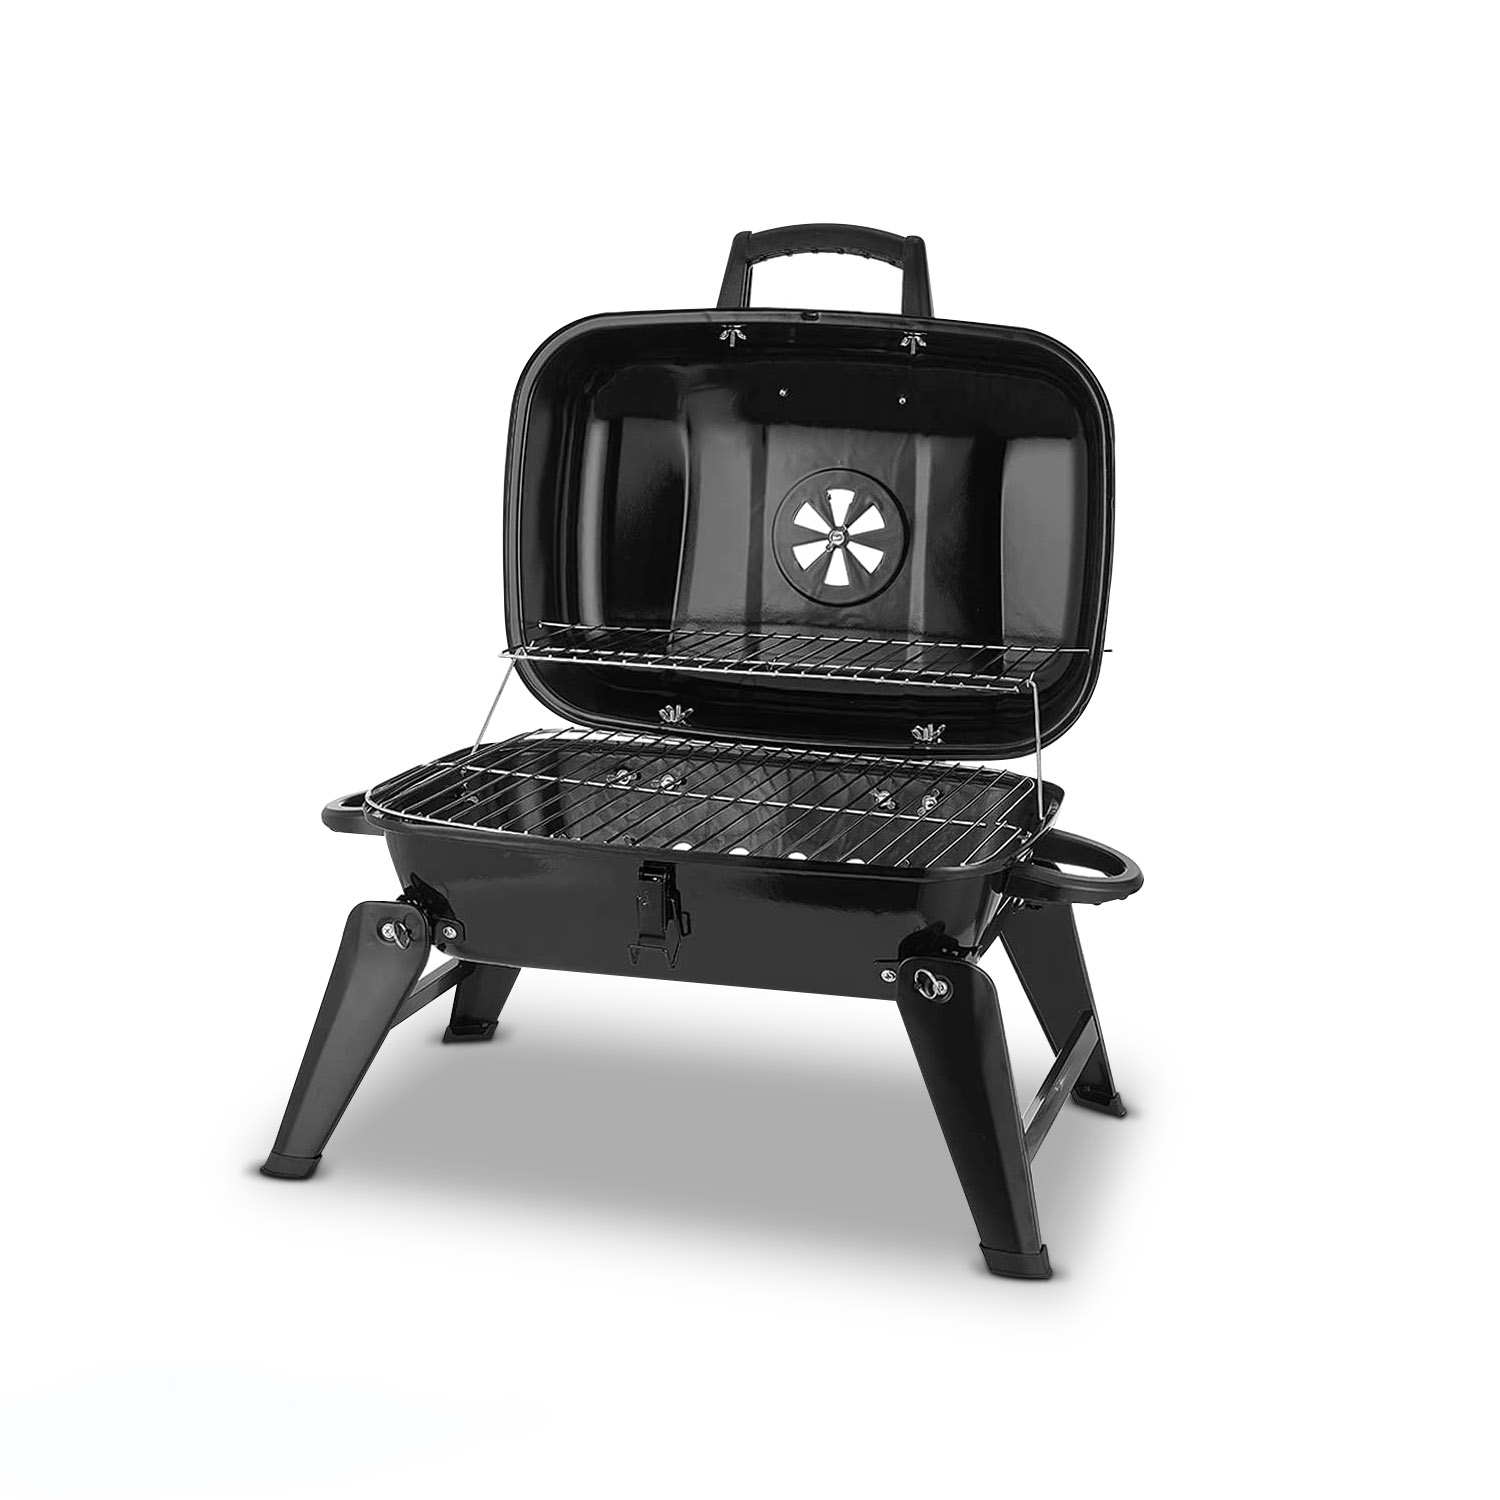 Cusimax 18 Inch Charcoal Grill For Camping Patio Backyard And Any Outdoor Cooking, Portable Folding Tabletop Grill For Easy Storage,Black